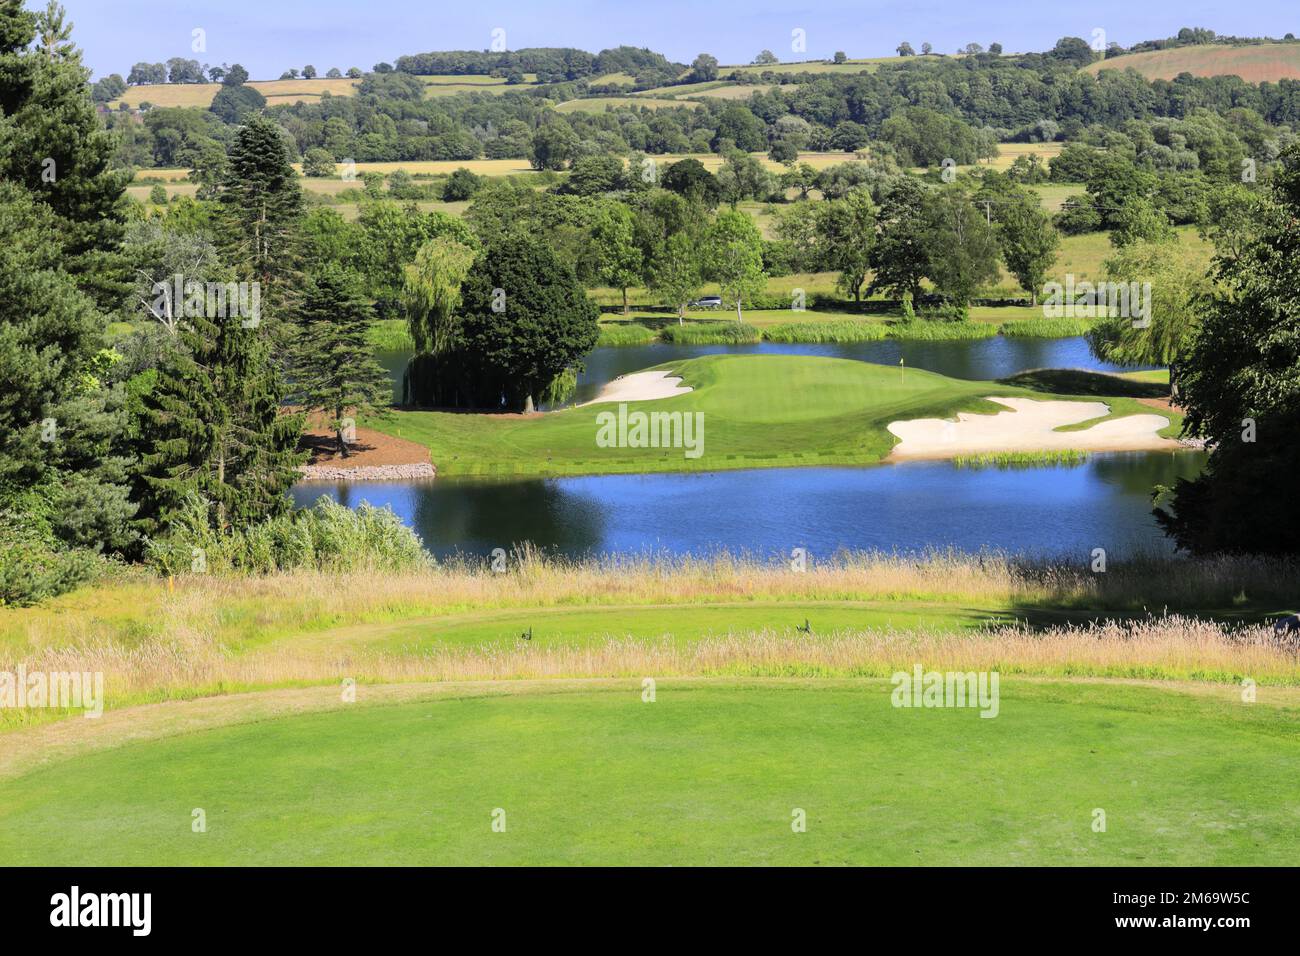 Hole 17 on the JCB Golf & Country Club course near Rocester, Uttoxeter, Staffordshire, England Stock Photo